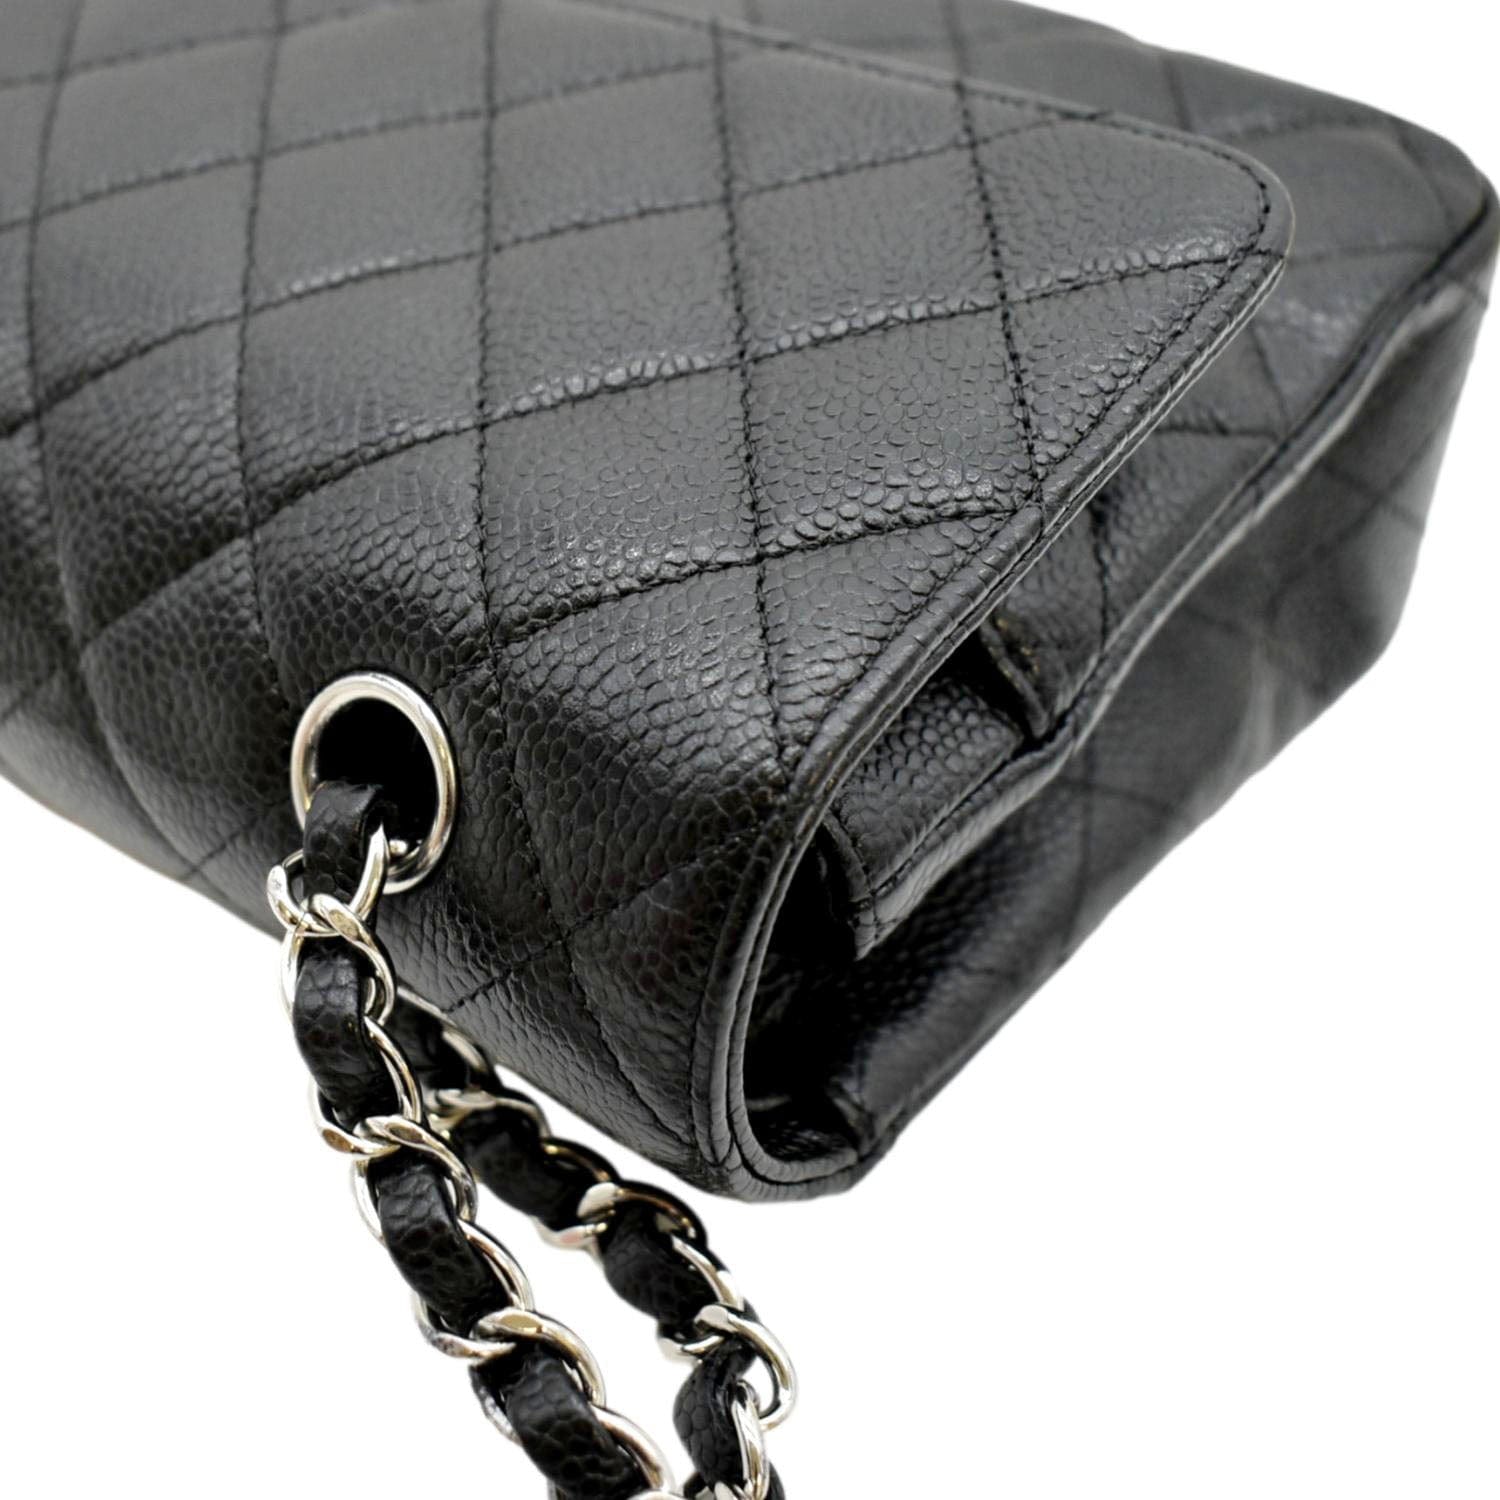 CHANEL Caviar Quilted Medium Double Flap Black | FASHIONPHILE